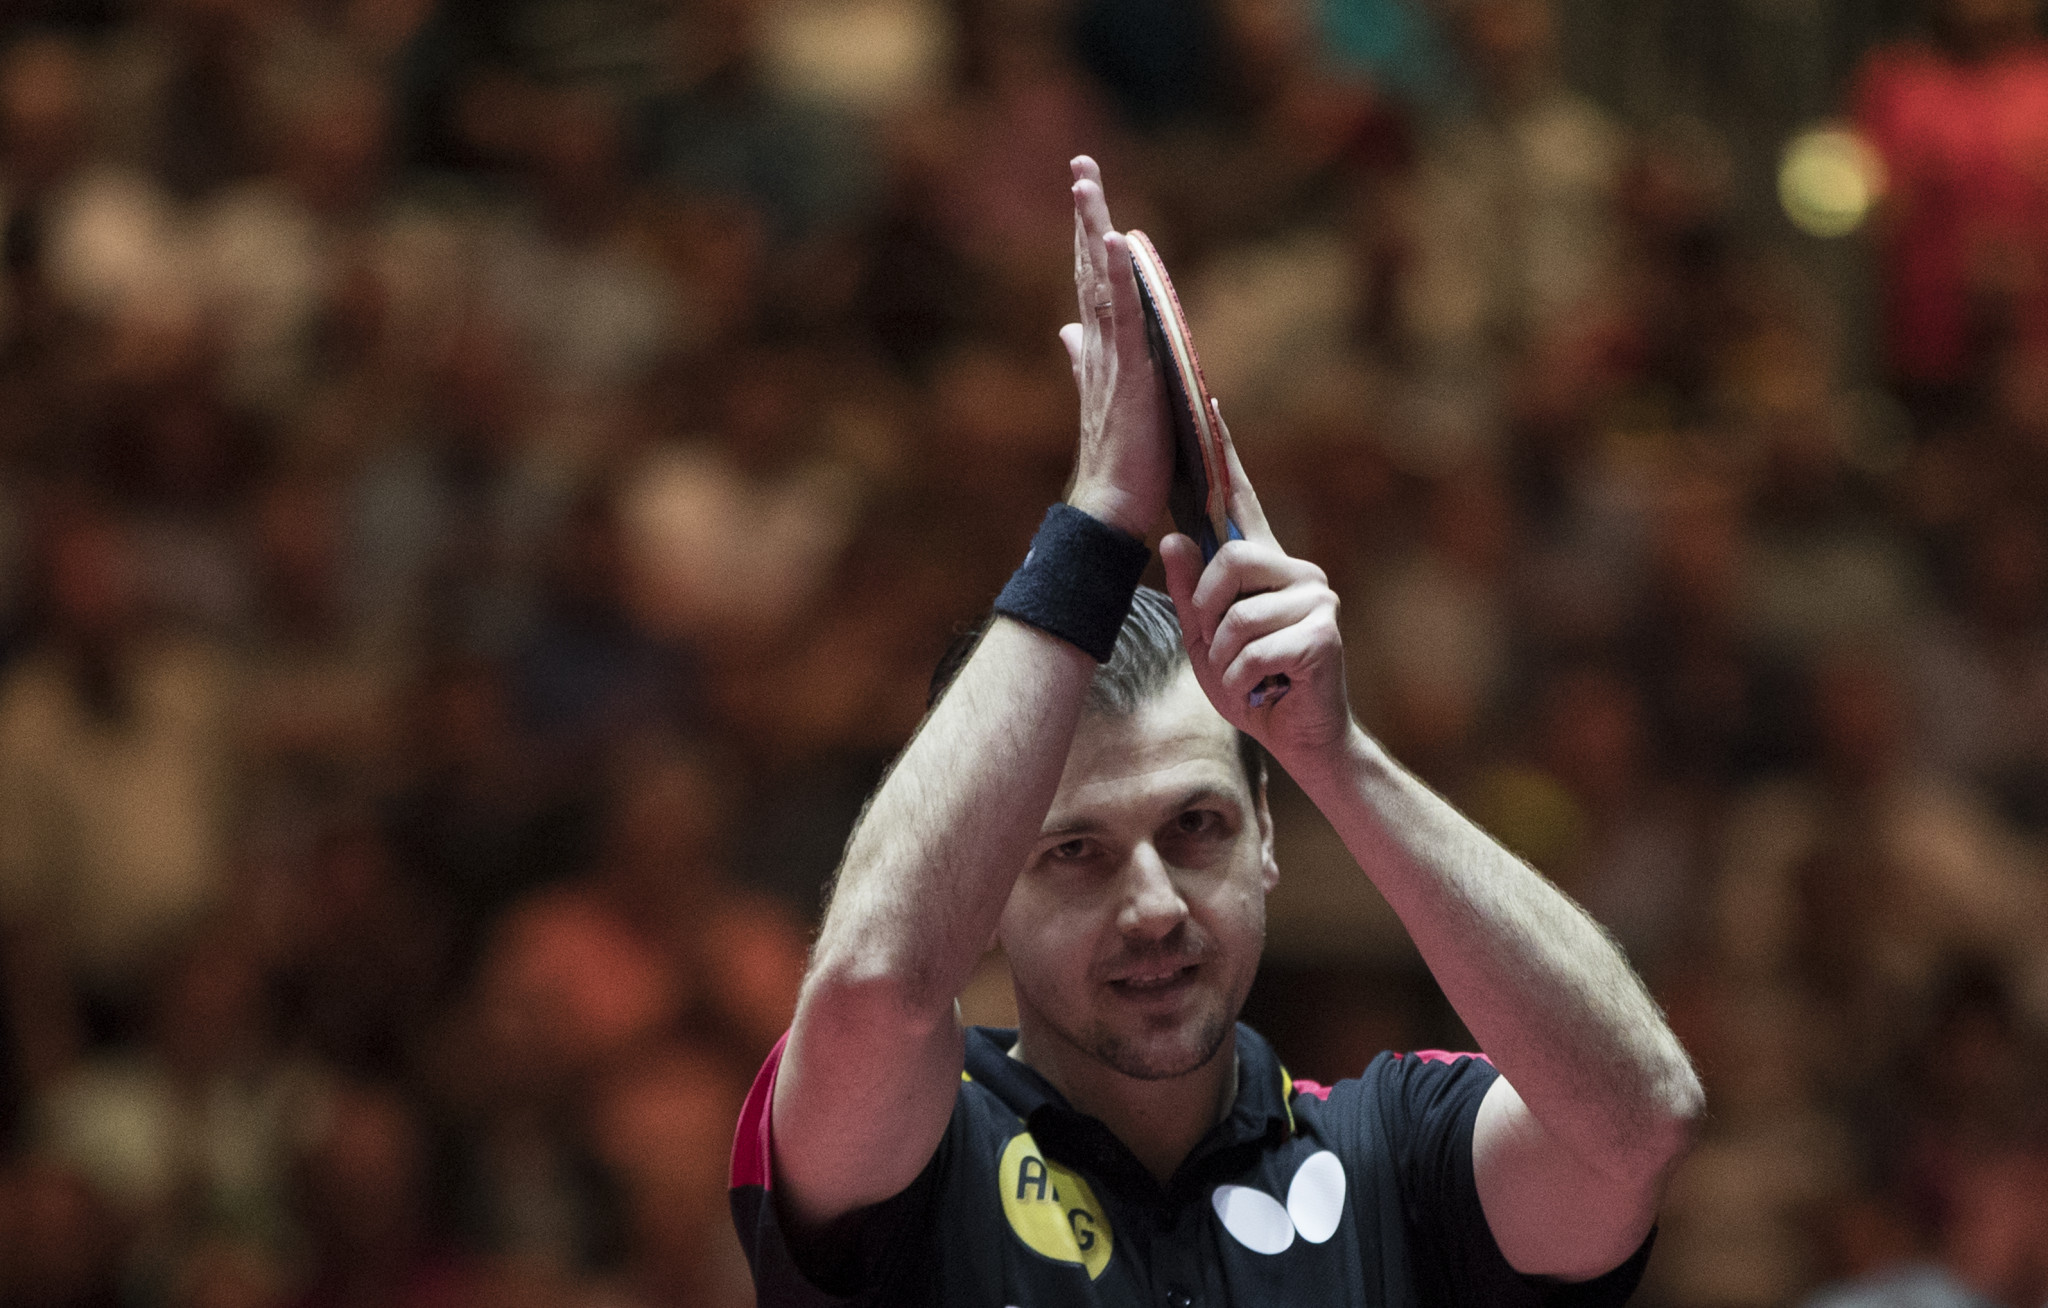 Boll to become oldest table tennis world number one